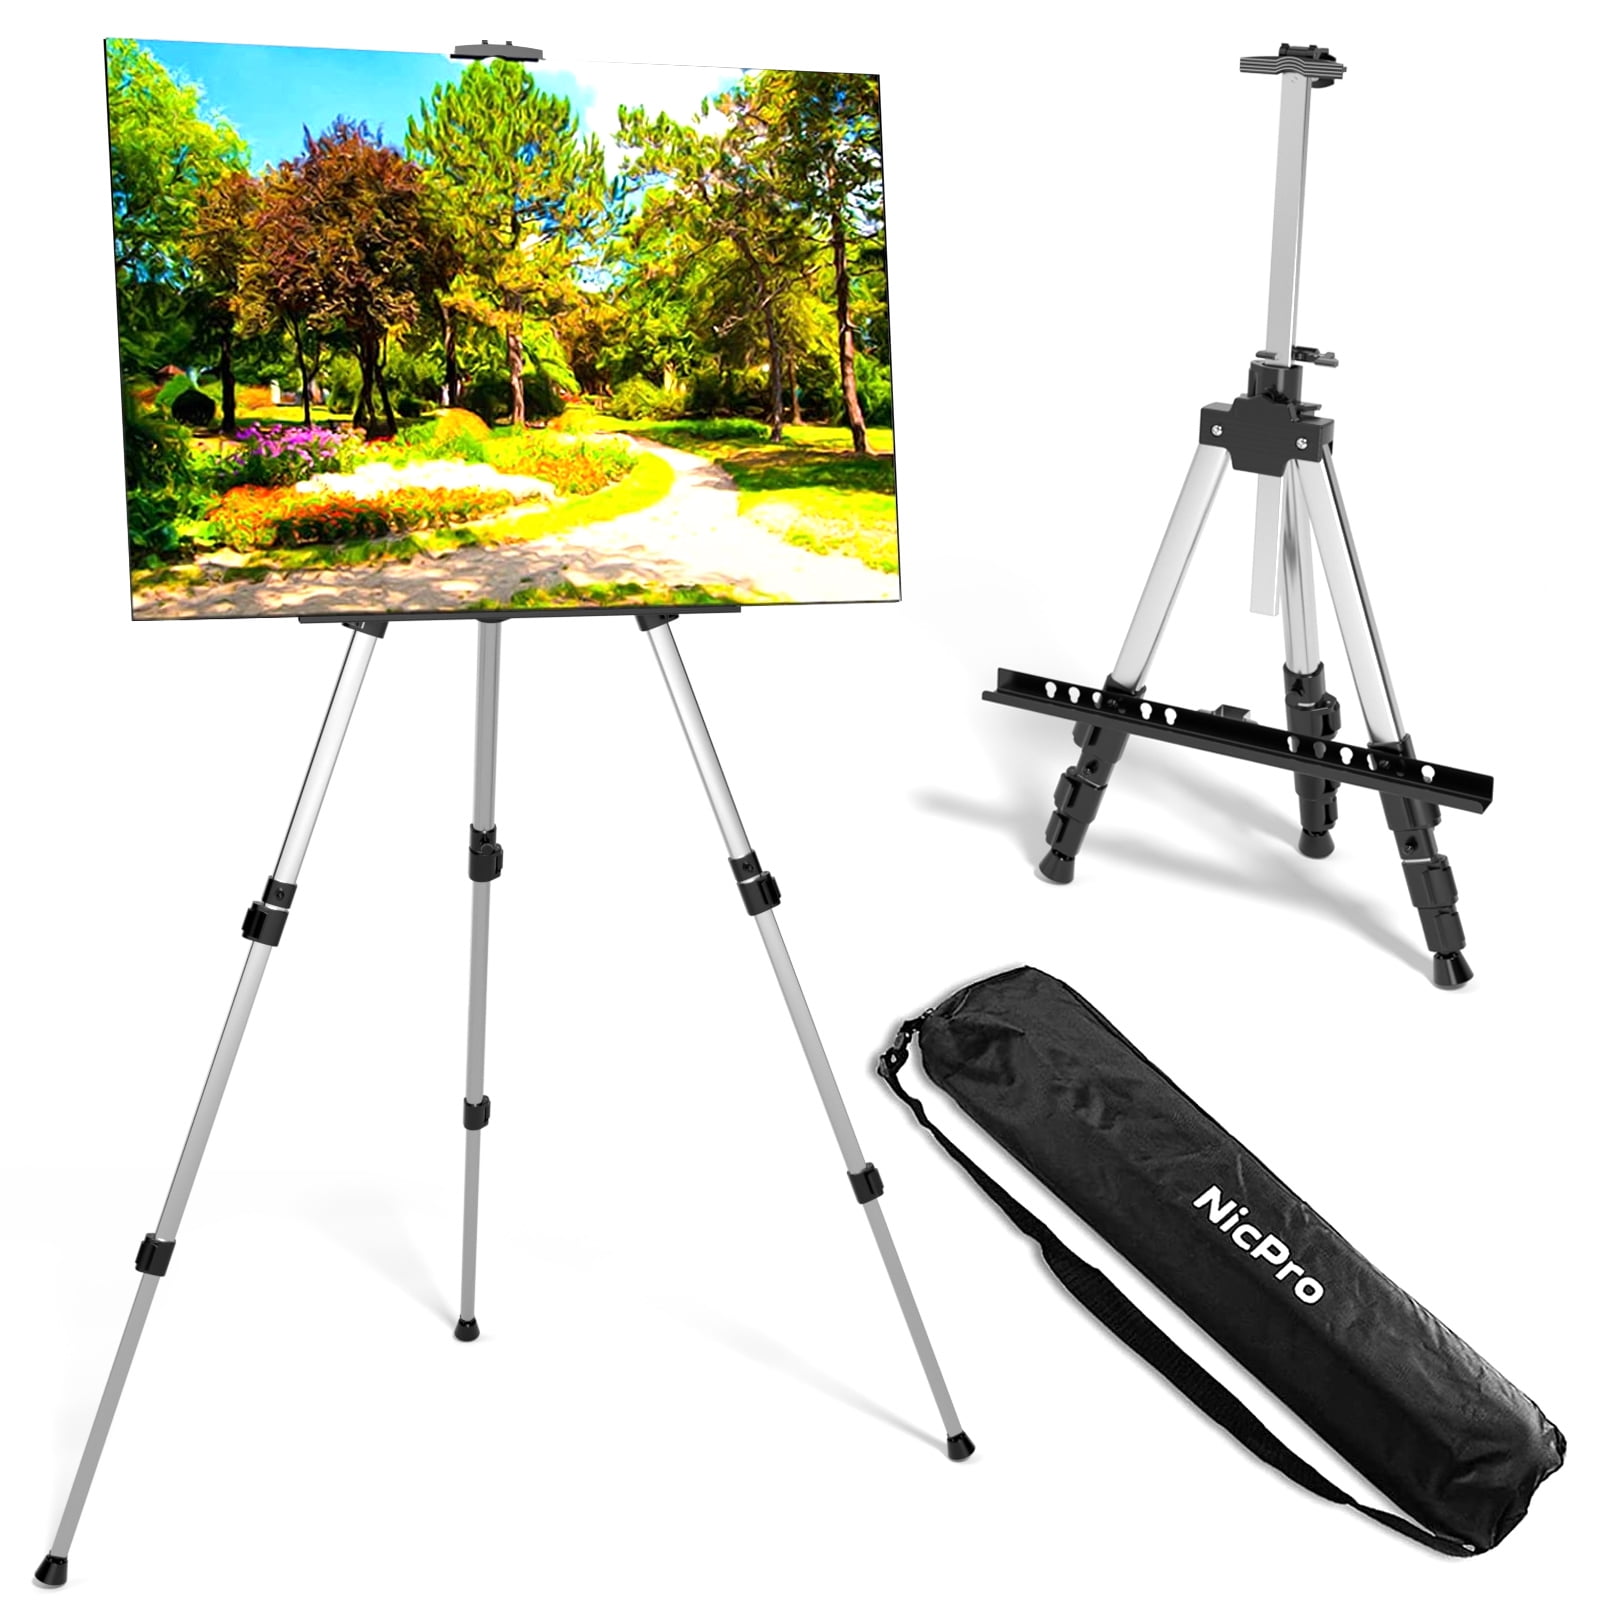 Floor Easel with Fixed Height Sign Supports, 58h Tripod Stand for